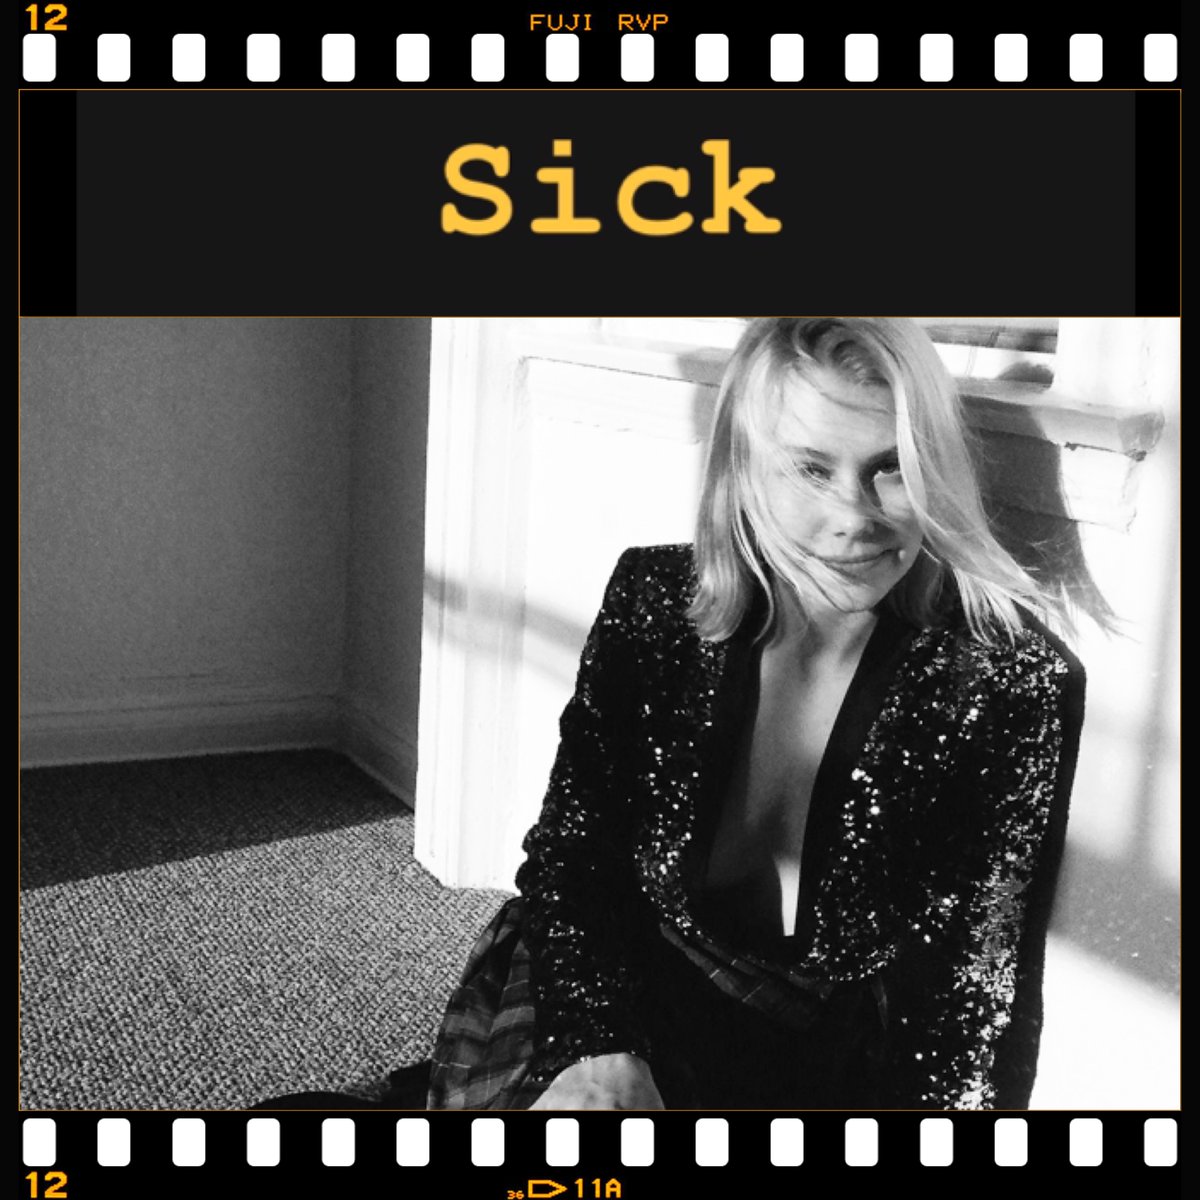 #LifeInSongs
📌SICK
Motion Sickness
Phoebe Bridgers

Hard not to love PB 🥜🧈..😎

I have emotional motion sickness
Somebody roll the windows down

There are no words in the English language
I could scream to drown you out

🟢 sptfy.com/MotionSickness
🟥 youtu.be/9sfYpolGCu8